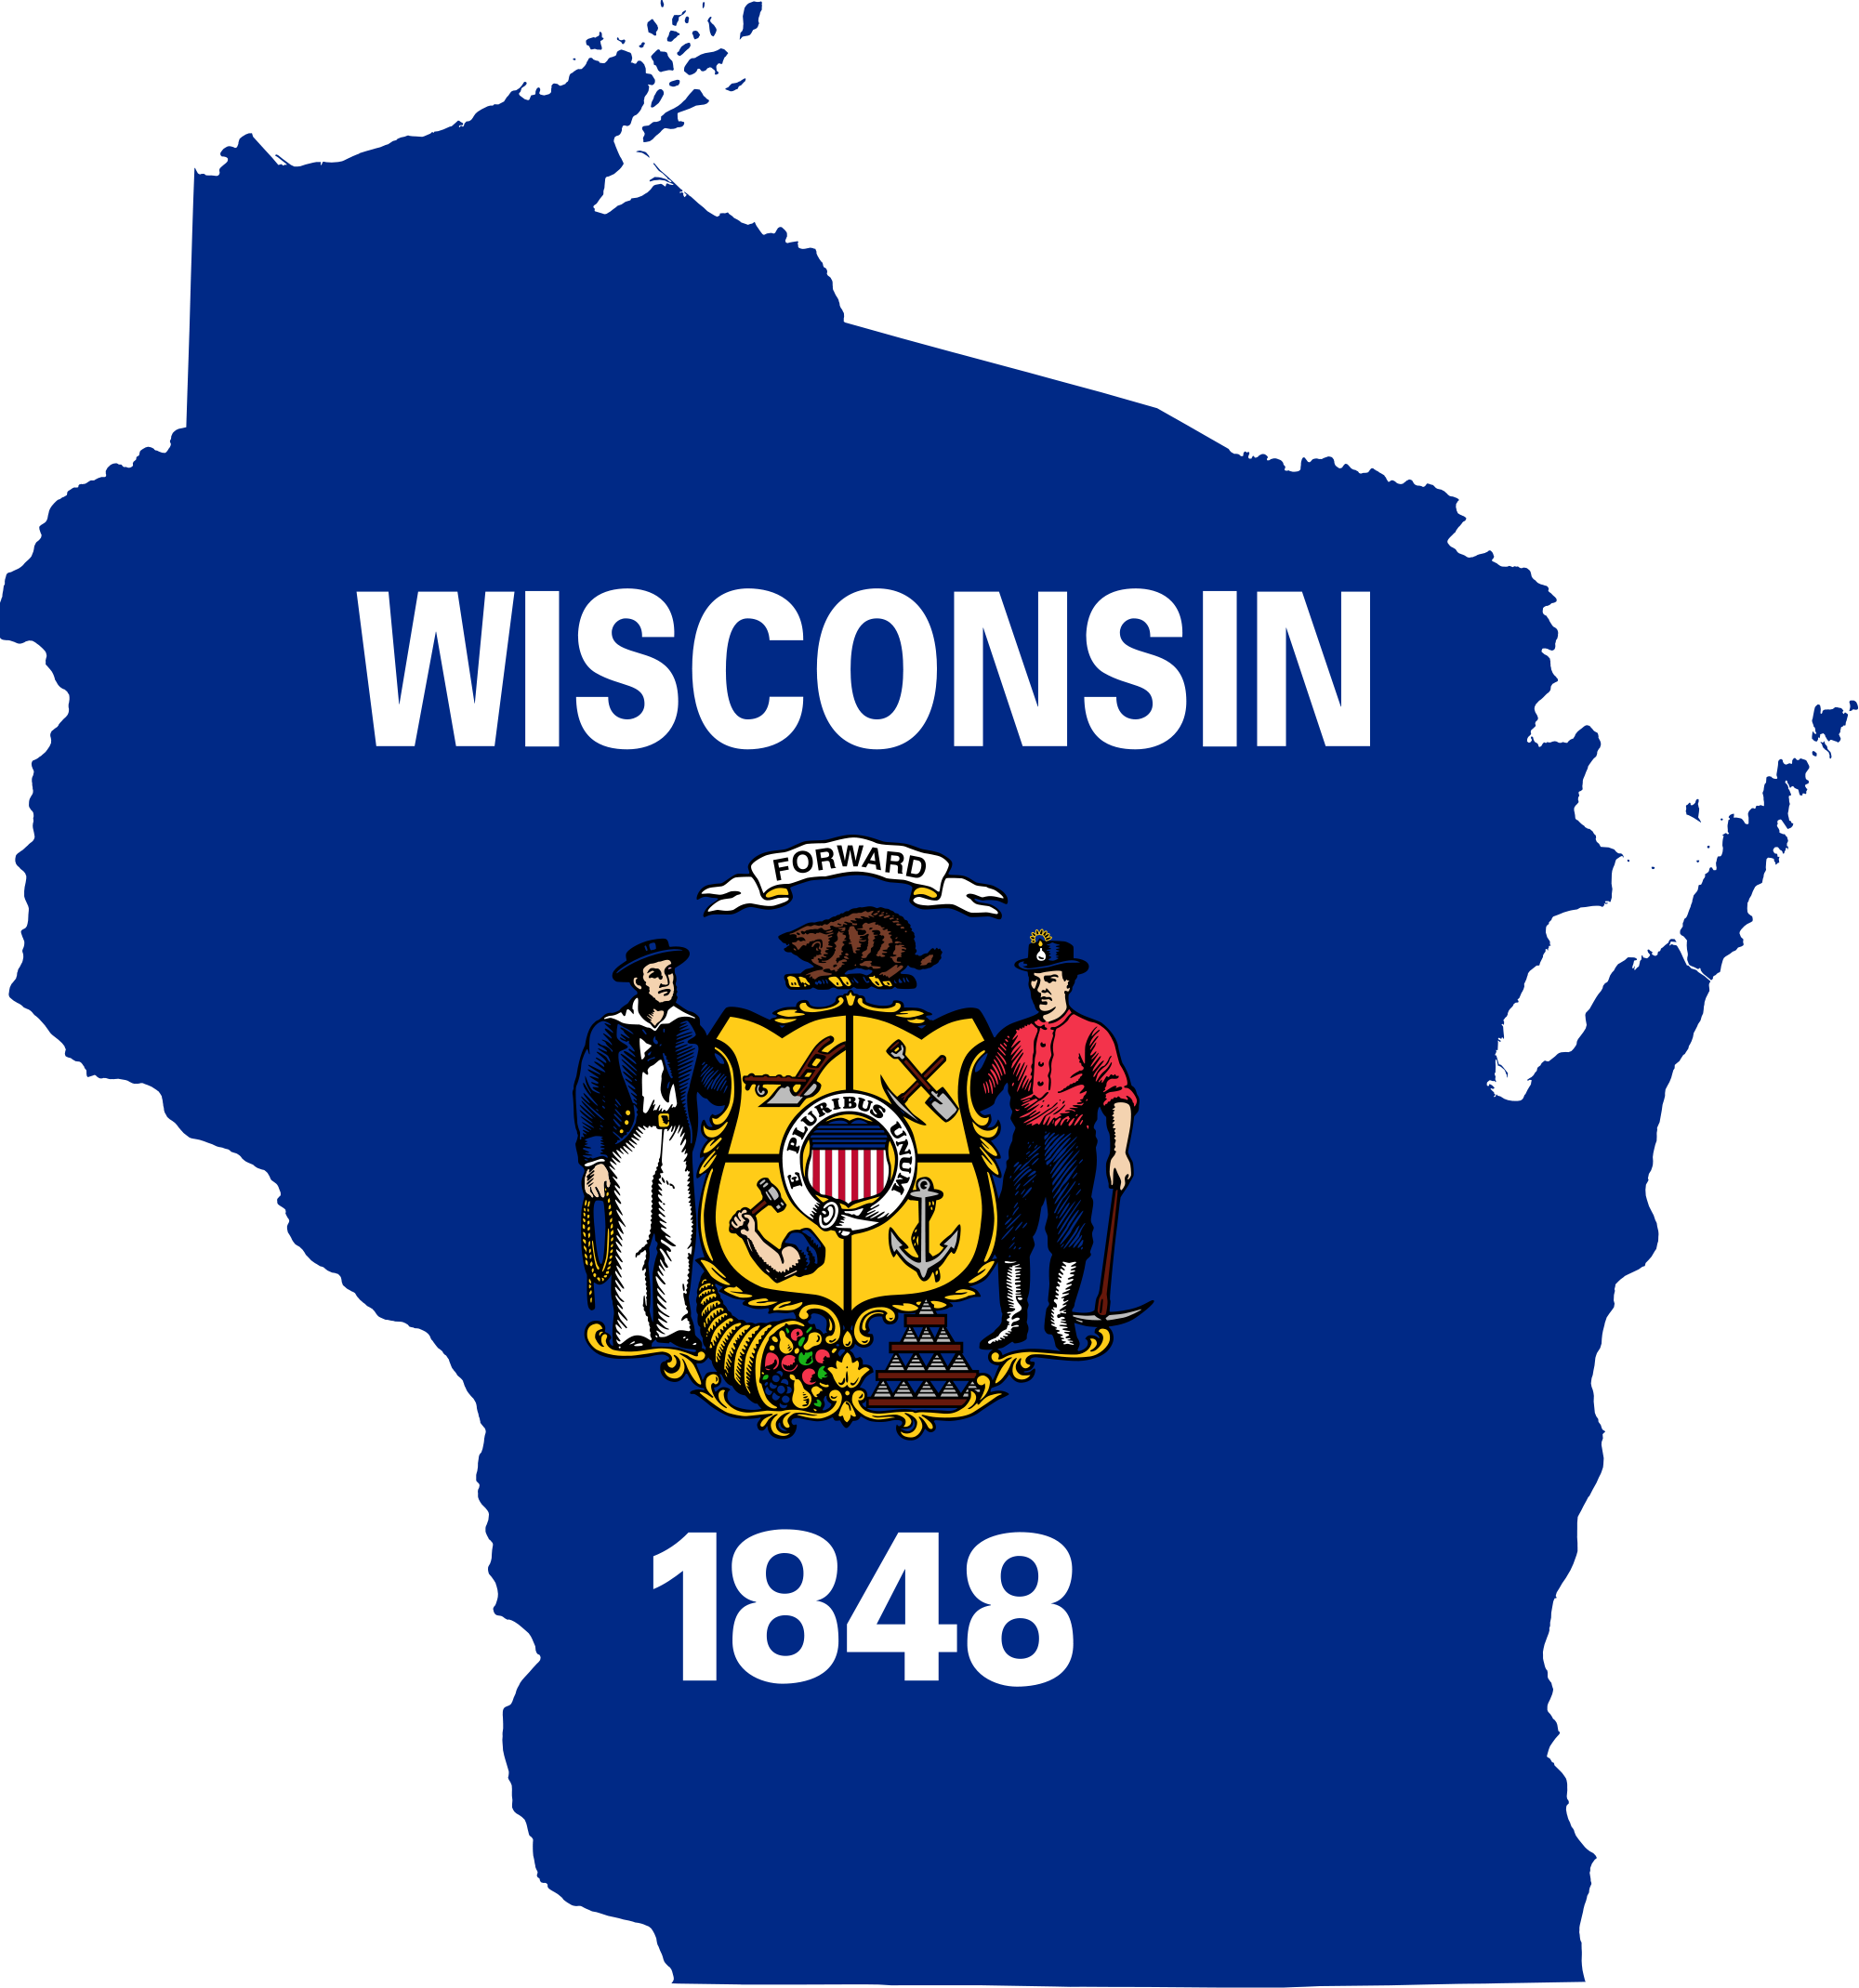 Outline of Wisconsin state with state flag within the outline